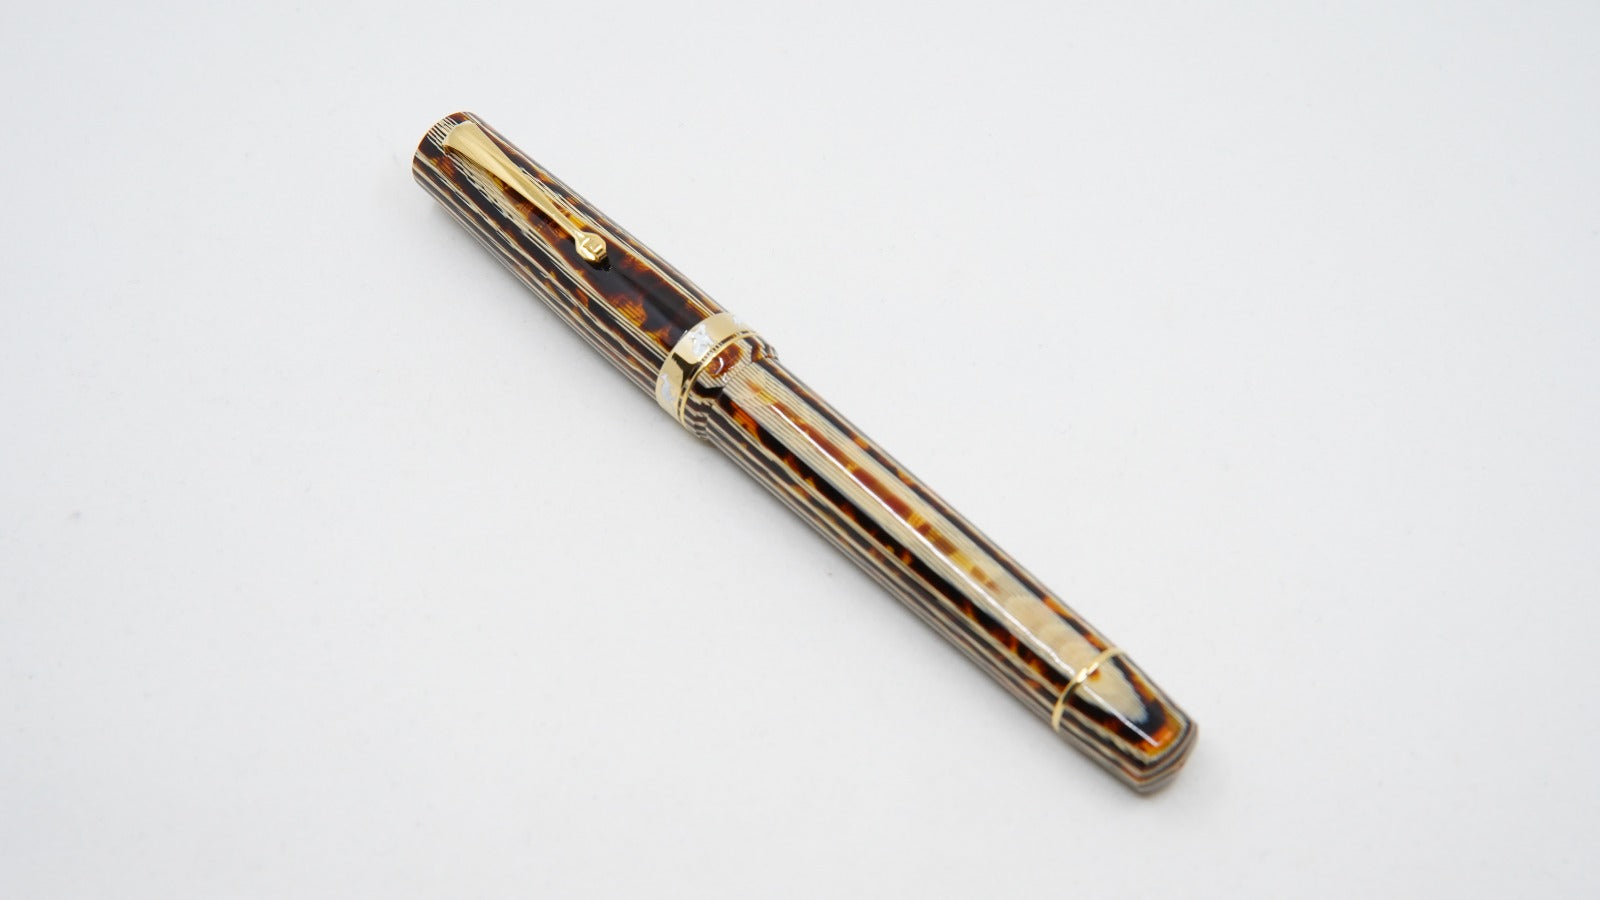 ASC Australia Series Bologna Extra - The Outback Limited Edition of 50 Pens